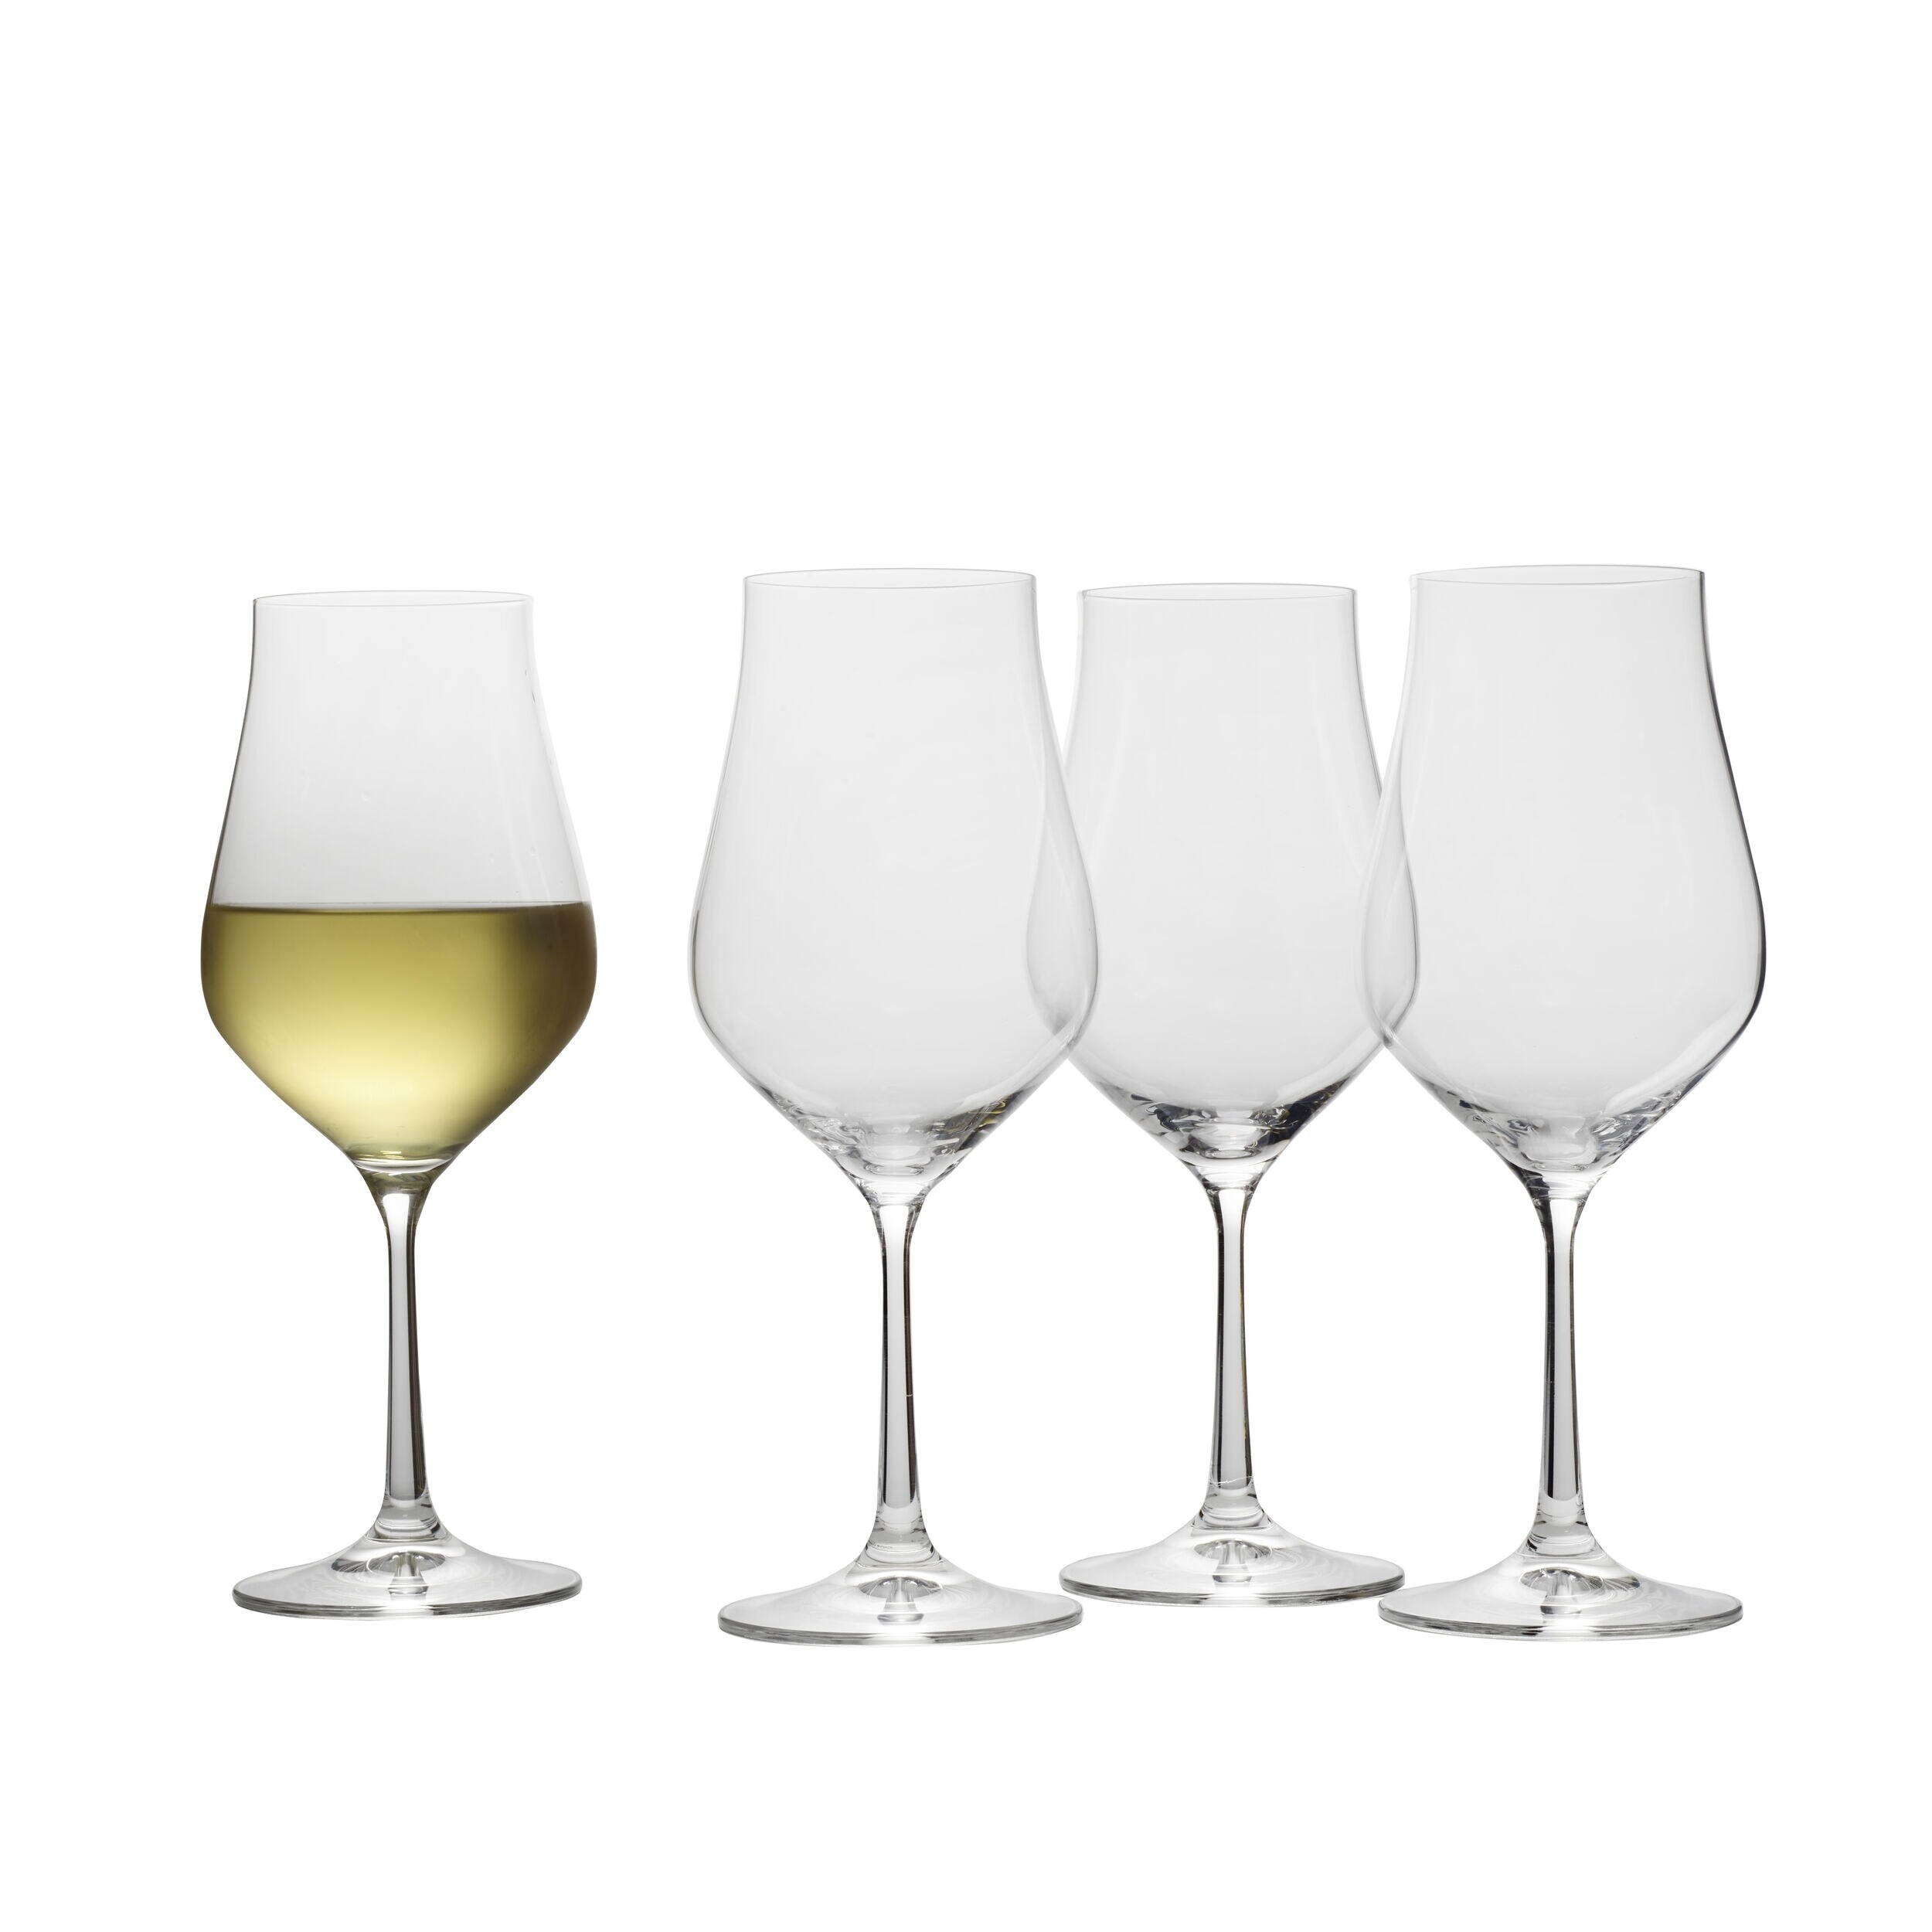 Contemporary Mikasa Tall Beer Glasses- Set of 4